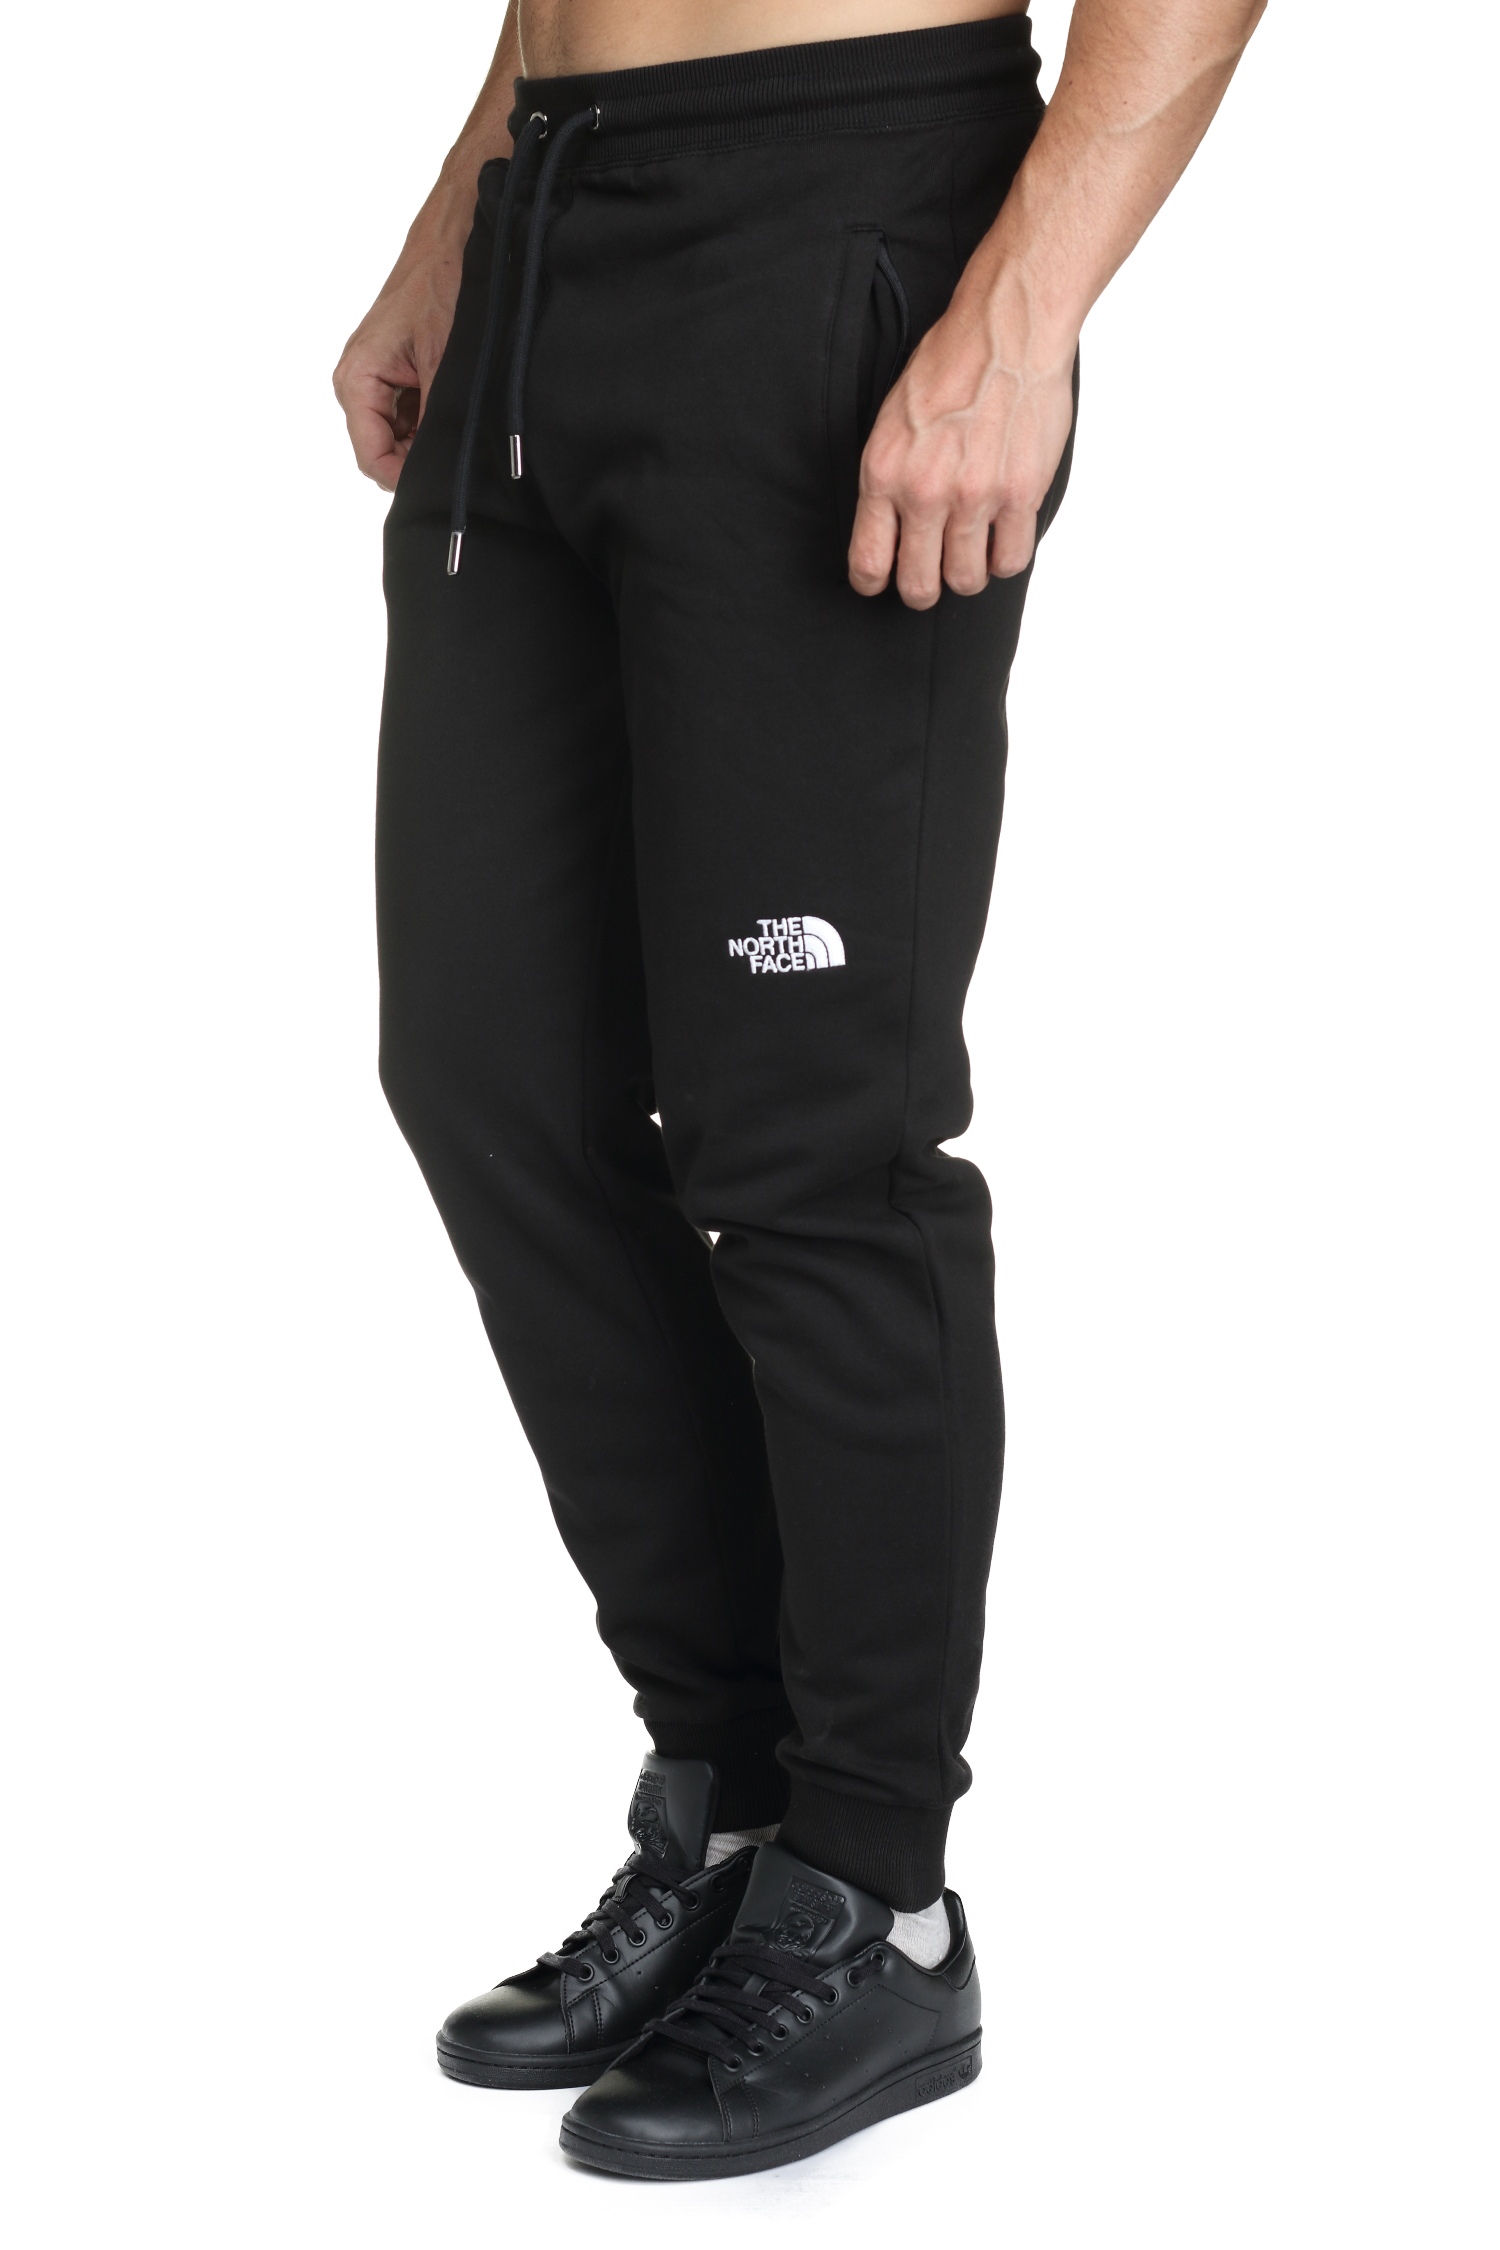 https://www.leadermode.com/209363/the-north-face-m-nse-pant-nf0a4svqjk31-black.jpg